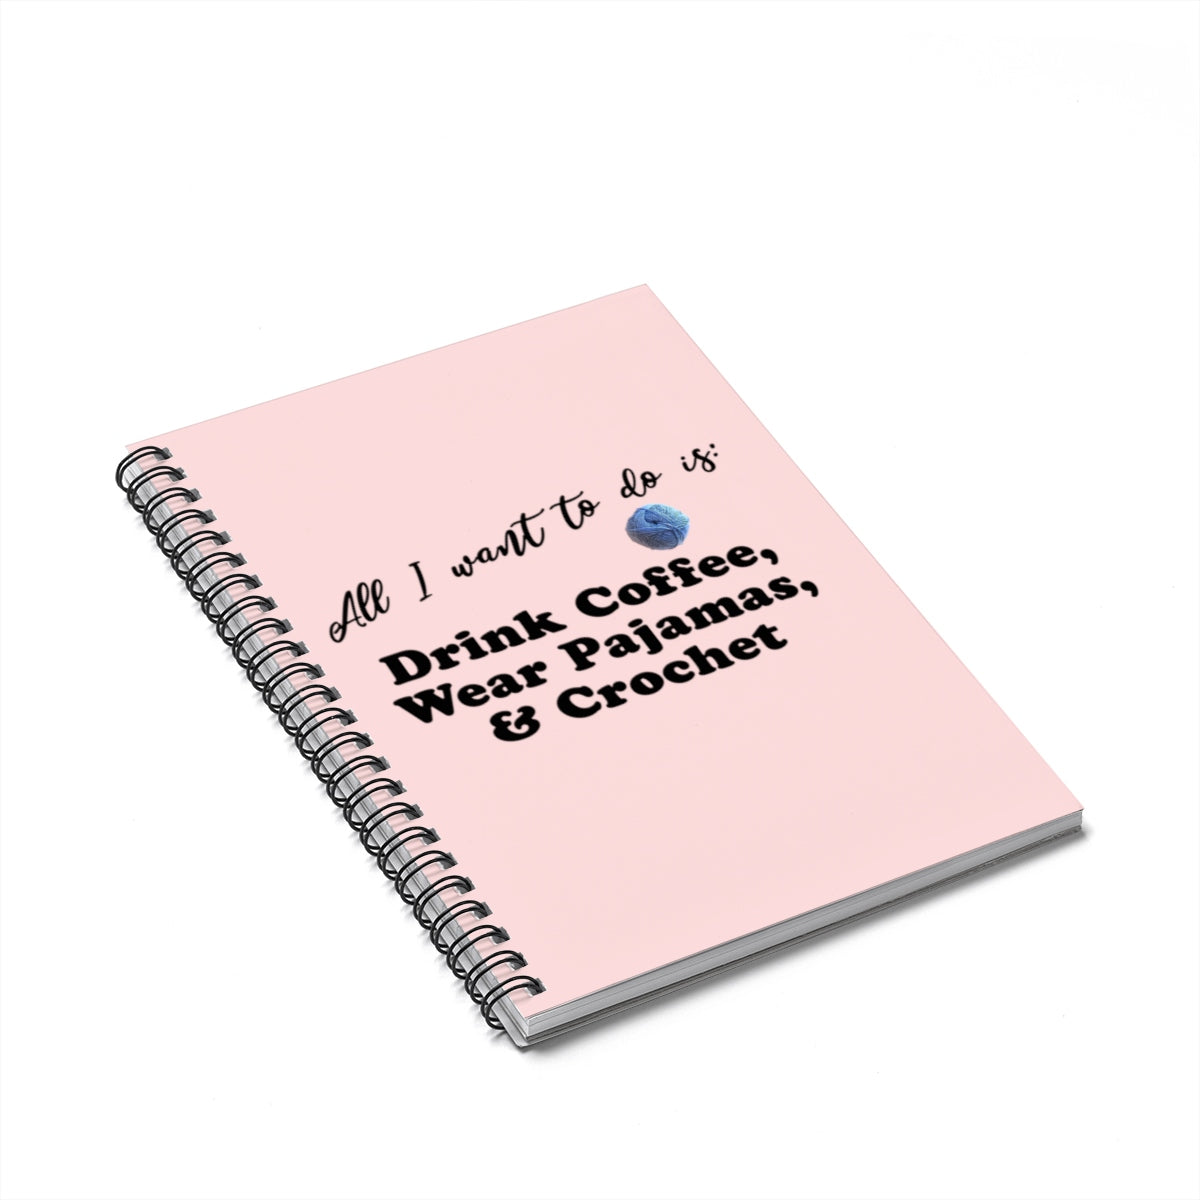 "All Want To Do Is: Drink Coffee, Wear Pajamas & Crochet" Black Letters - Spiral Notebook - Ruled Line